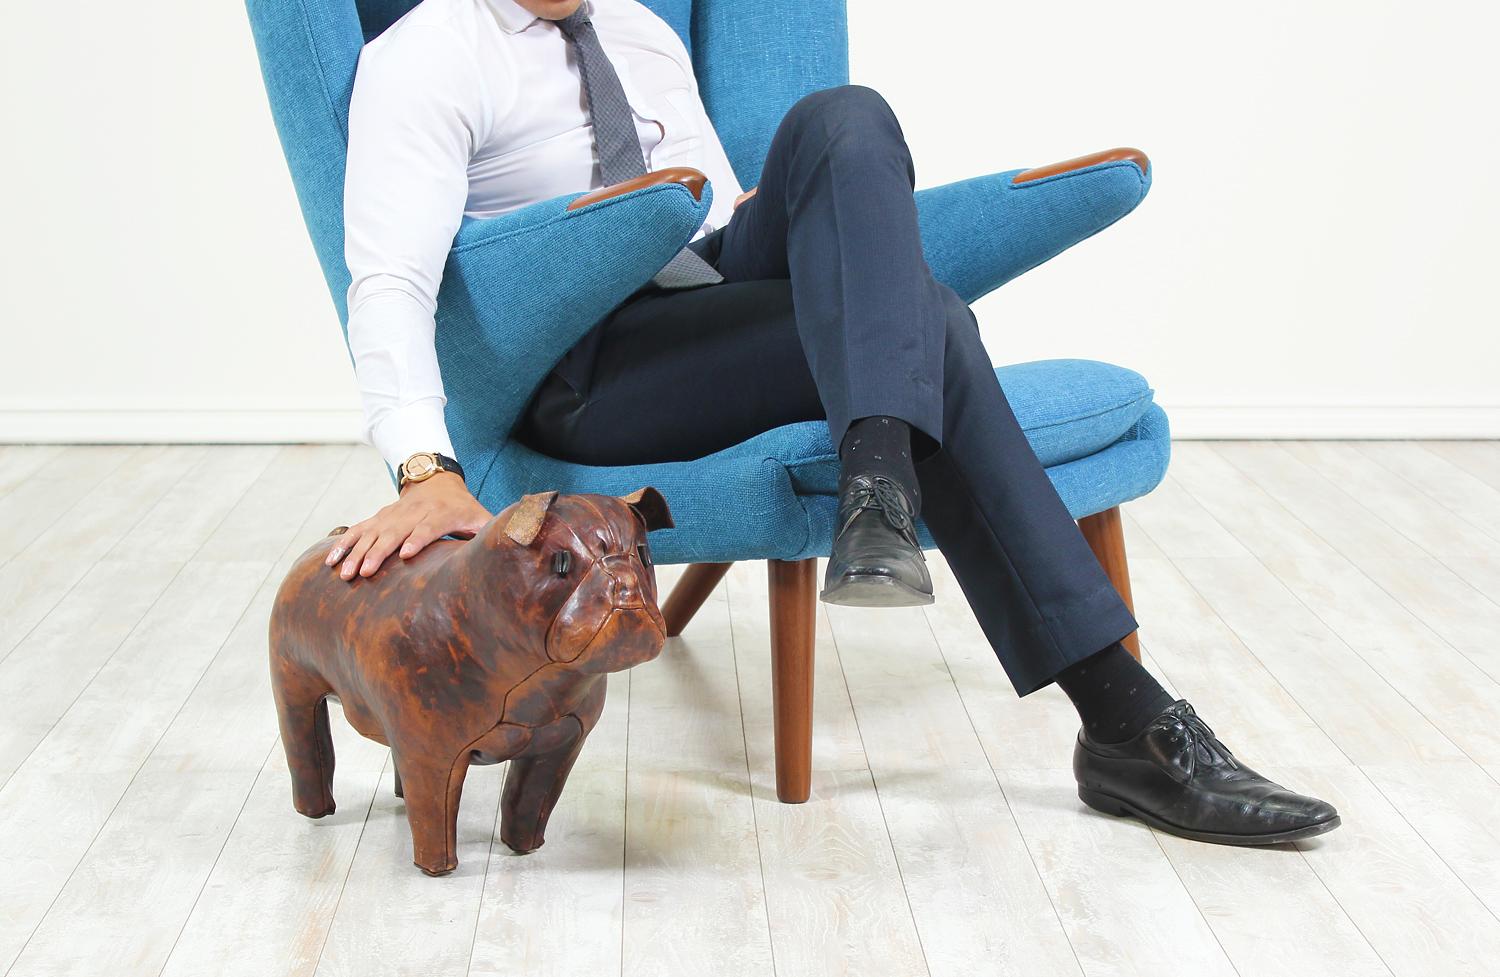 Adorable leather bulldog designed by Dimitri Omersa for Abercrombie and Fitch in England circa 1960’s. Originally designed to serve as a footstool, designer Dimitri Omersas’ sculptures are now collectors art. It features original hand-stitched